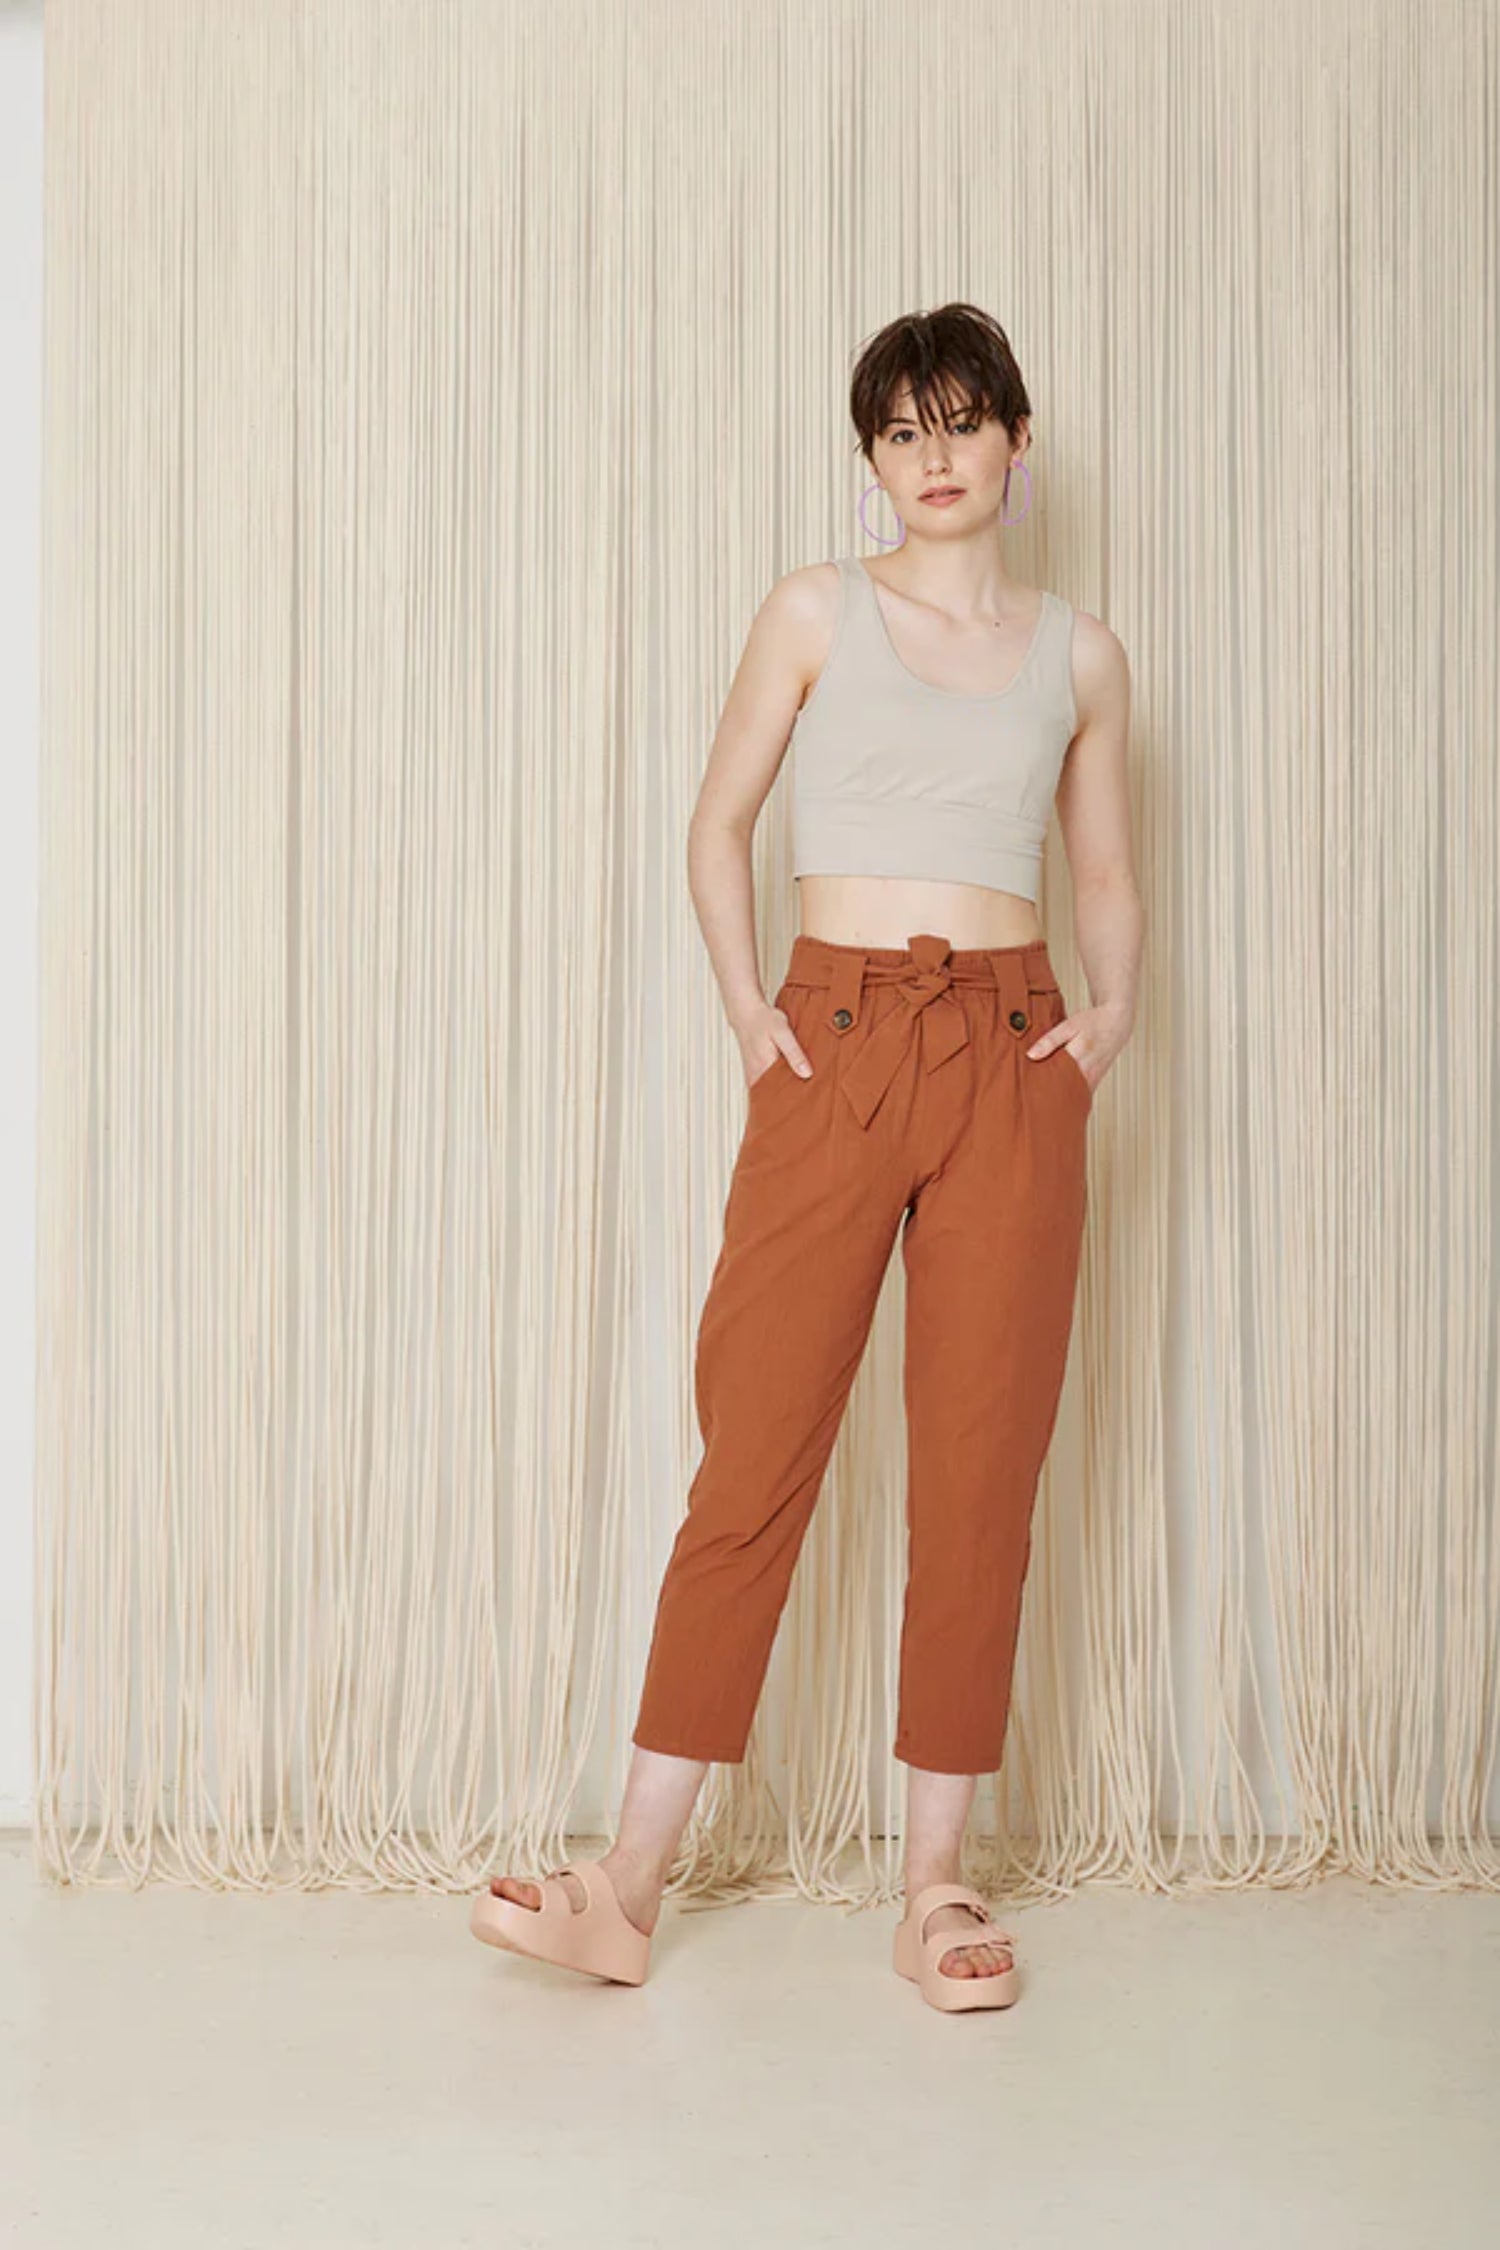 Hosta Pants by Cokluch, Sienna, elastic waist, sewn-in belt  held in place with loops and buttons, tapered ankle-length legs, eco-fabric, cotton, OEKO-TEX certified, sizes XS to XL, made in Montreal 